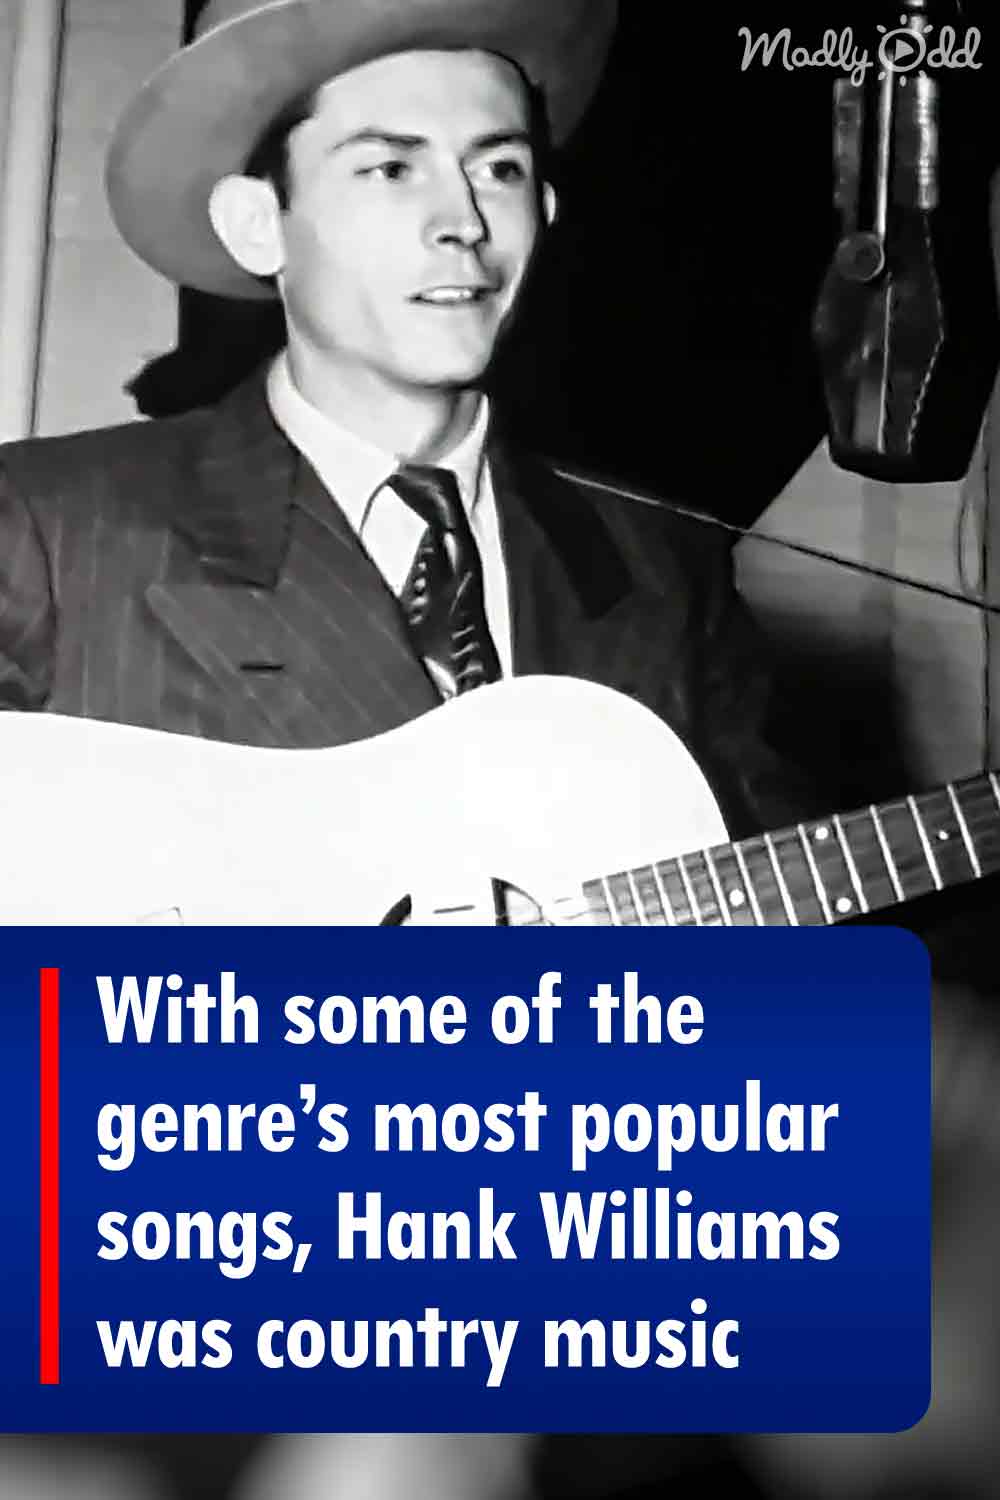 With some of the genre’s most popular songs, Hank Williams was country music